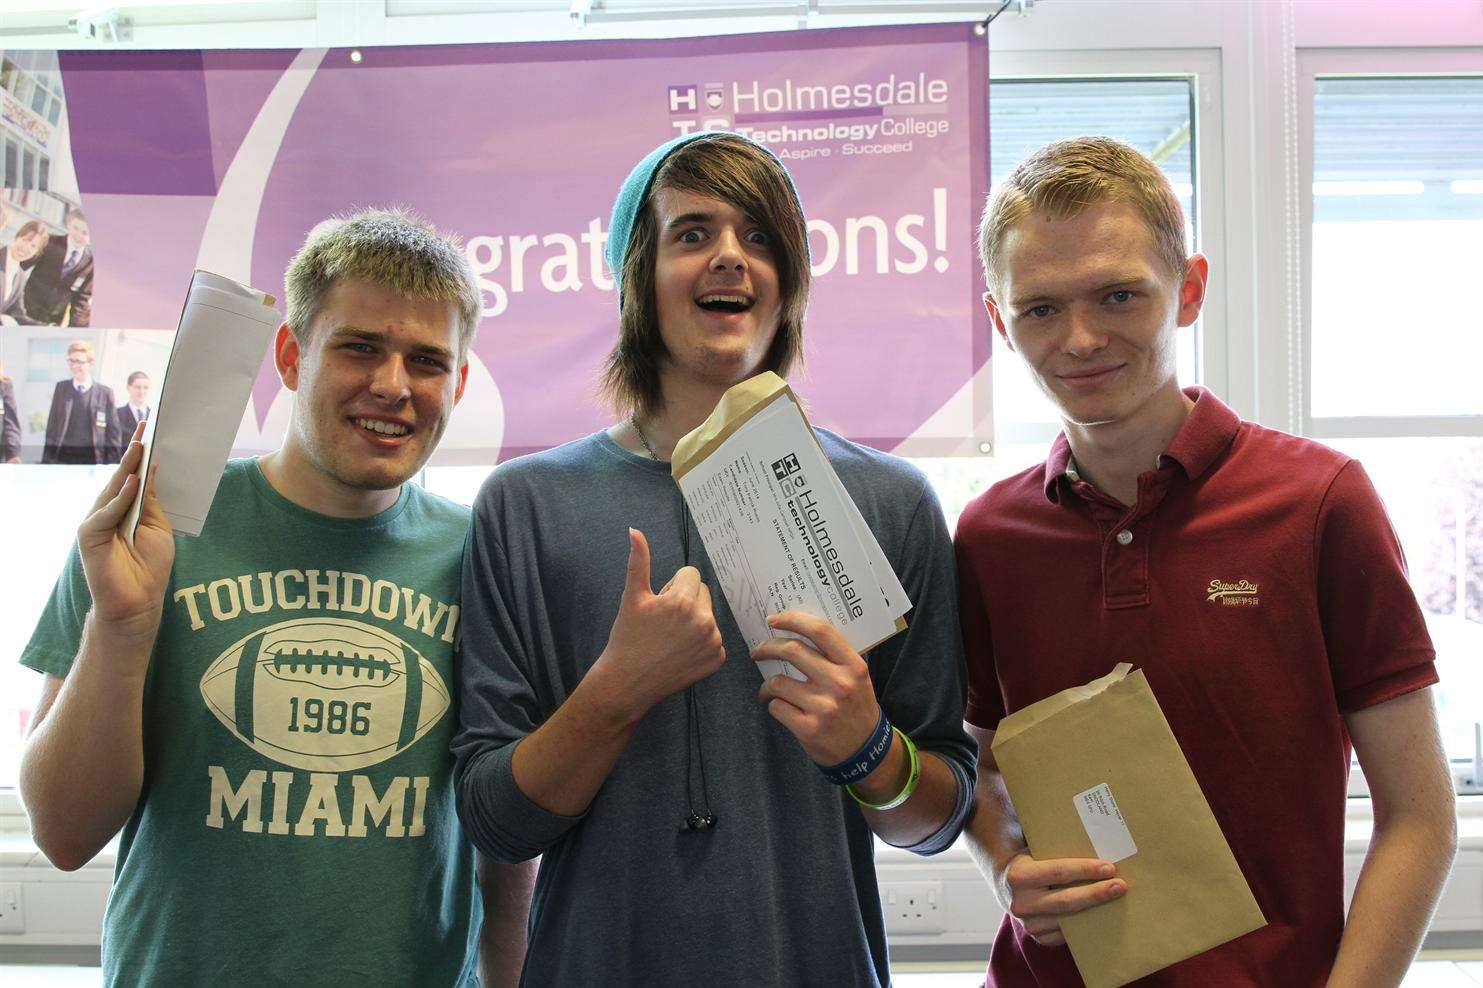 Lewis Boniface, Tony Russo and Harry Stone celebrate getting their A-level results at Holmesdale Technology College in Snodland.